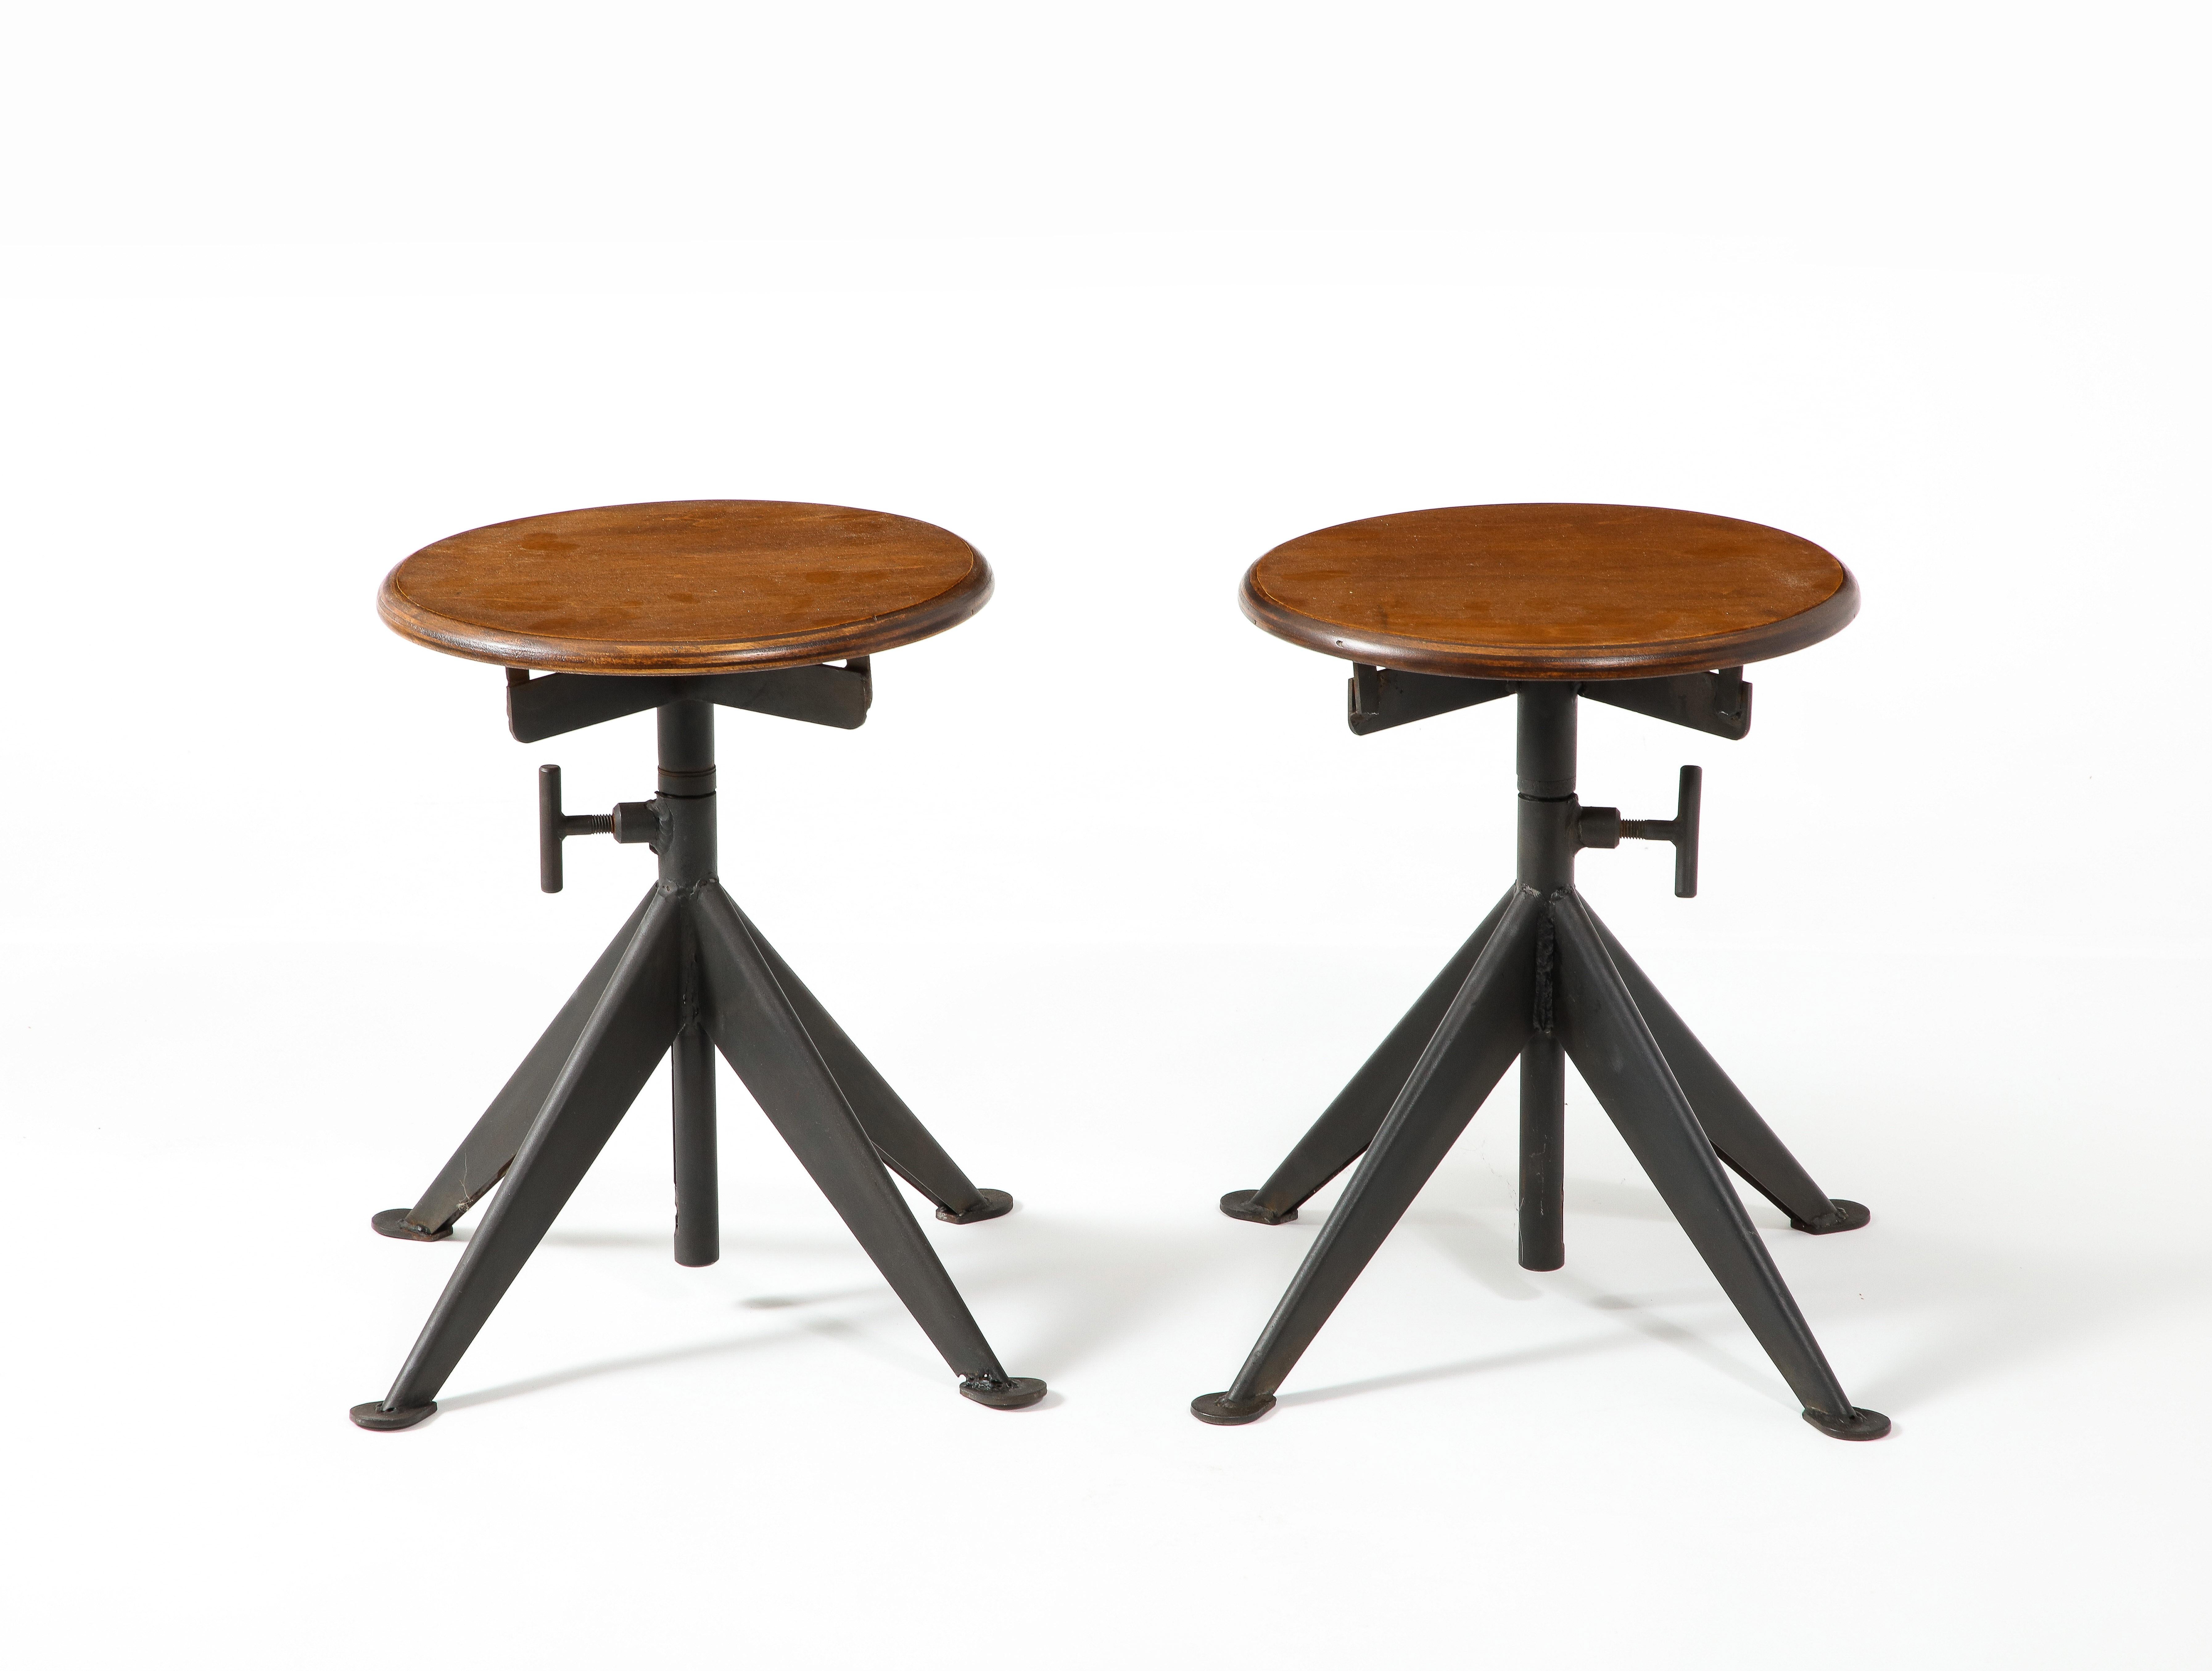 Pair of fully adjustable Iron and Plywood stools by Odeberg.
